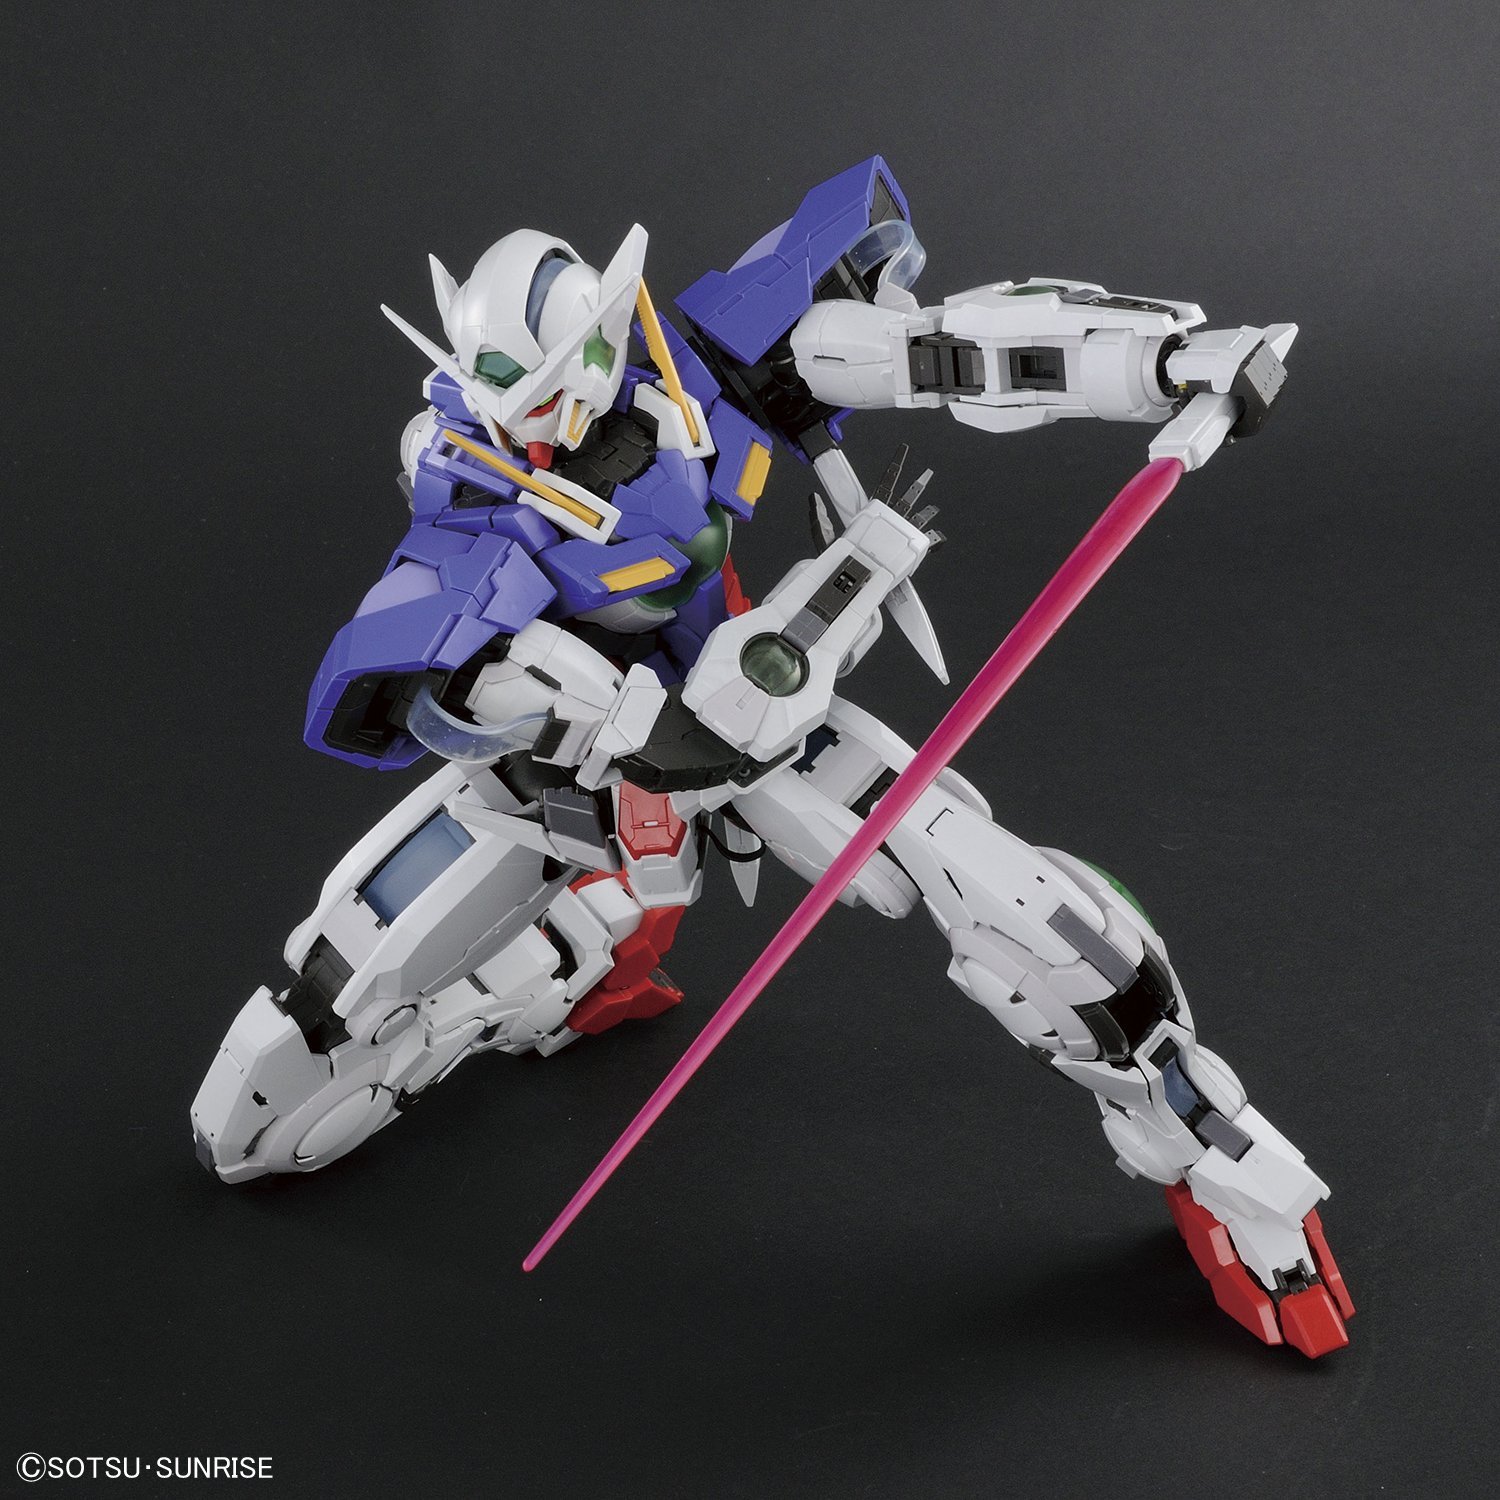 Bandai 1/60 PG exia picture 10 posture with full saber sword [00 10 anniversary]